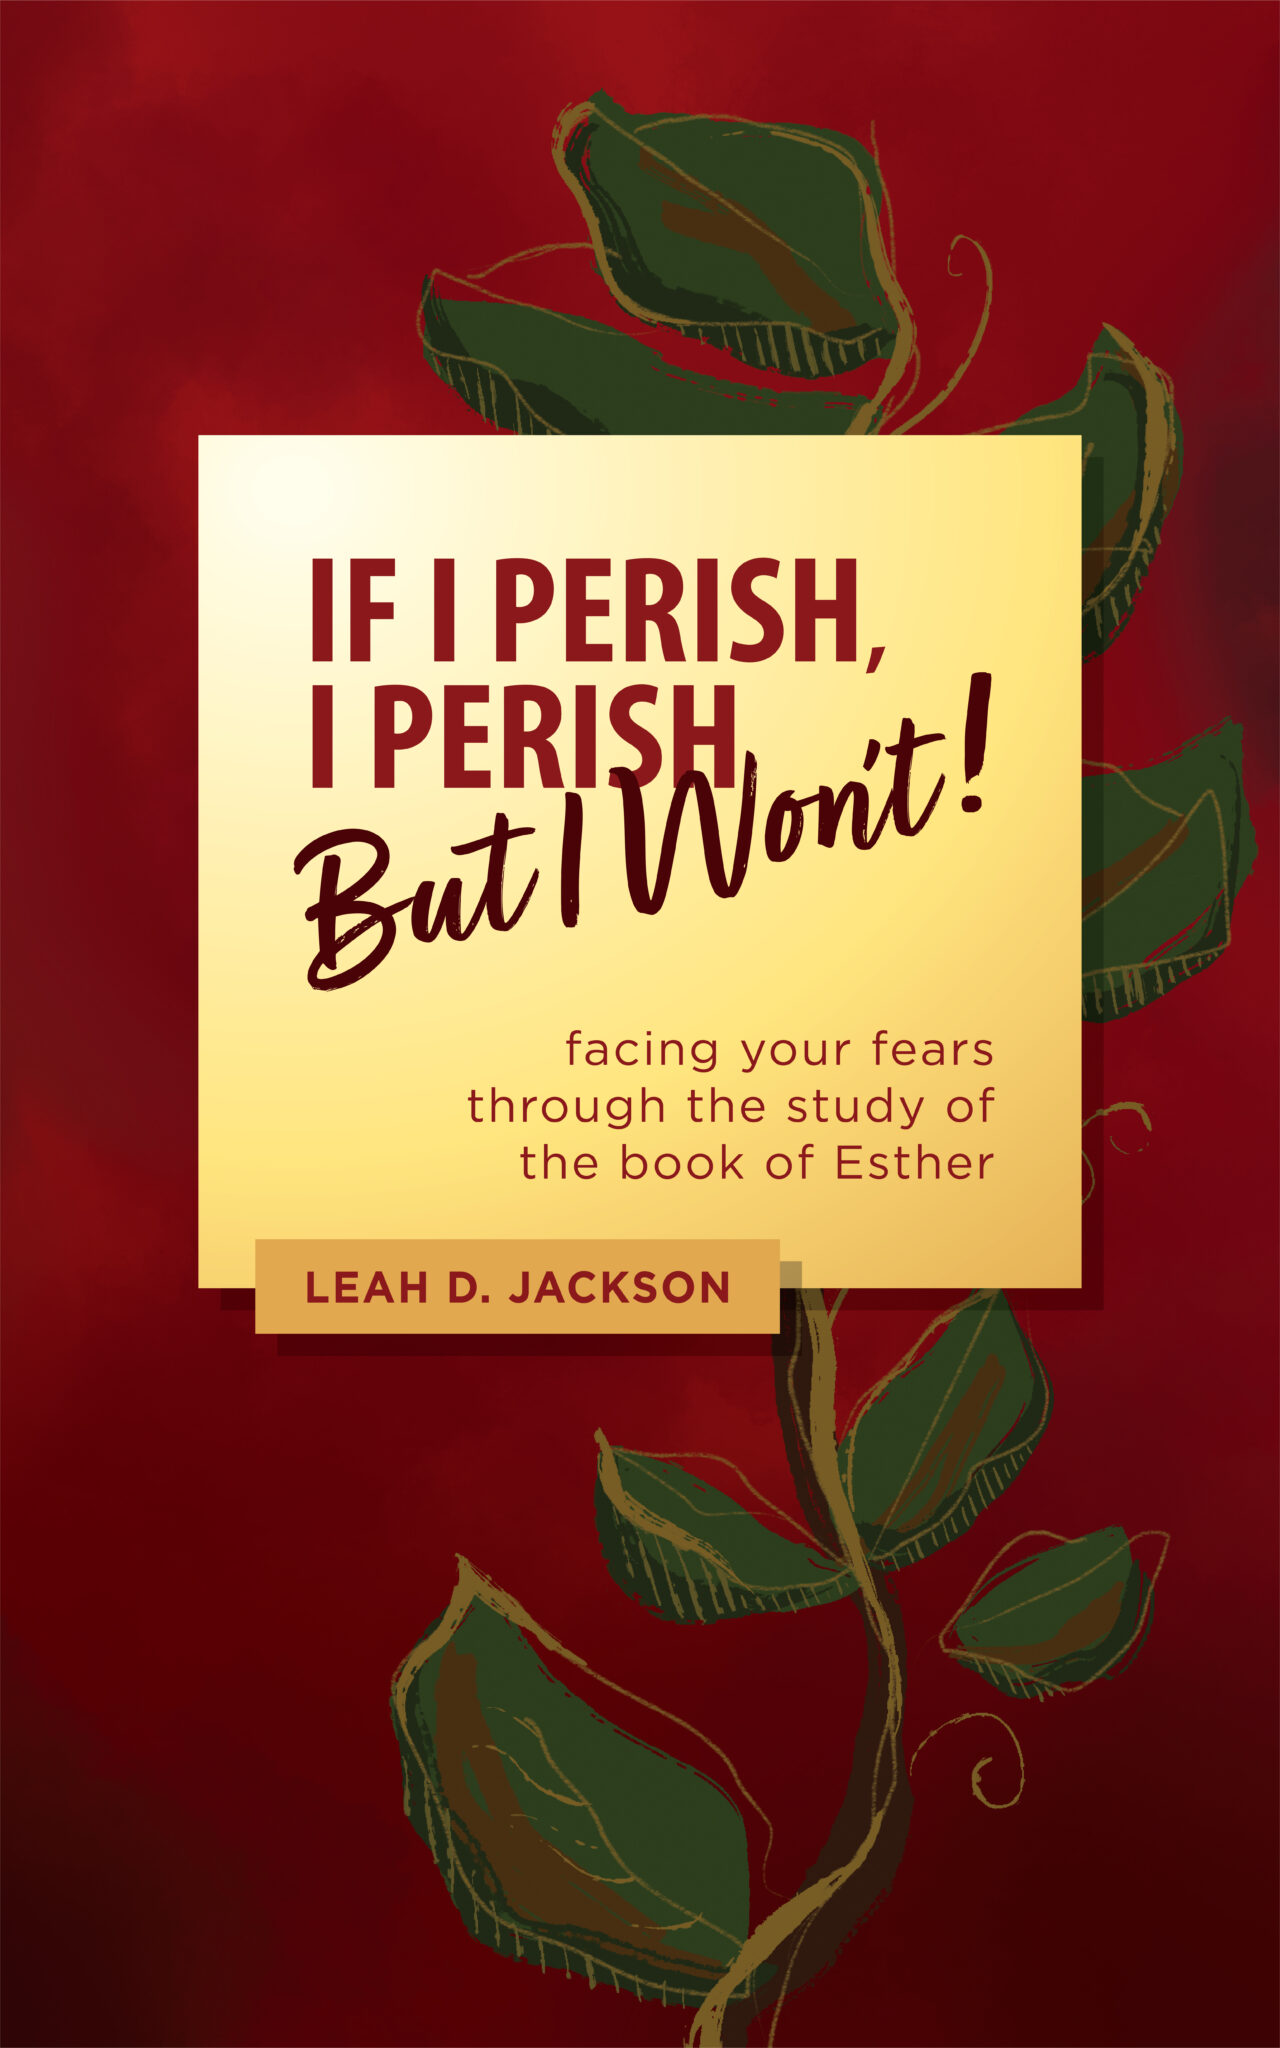 If I Perish, I Perish, But I Won’t!: Facing Your Fears Through the Study of the Book of Esther